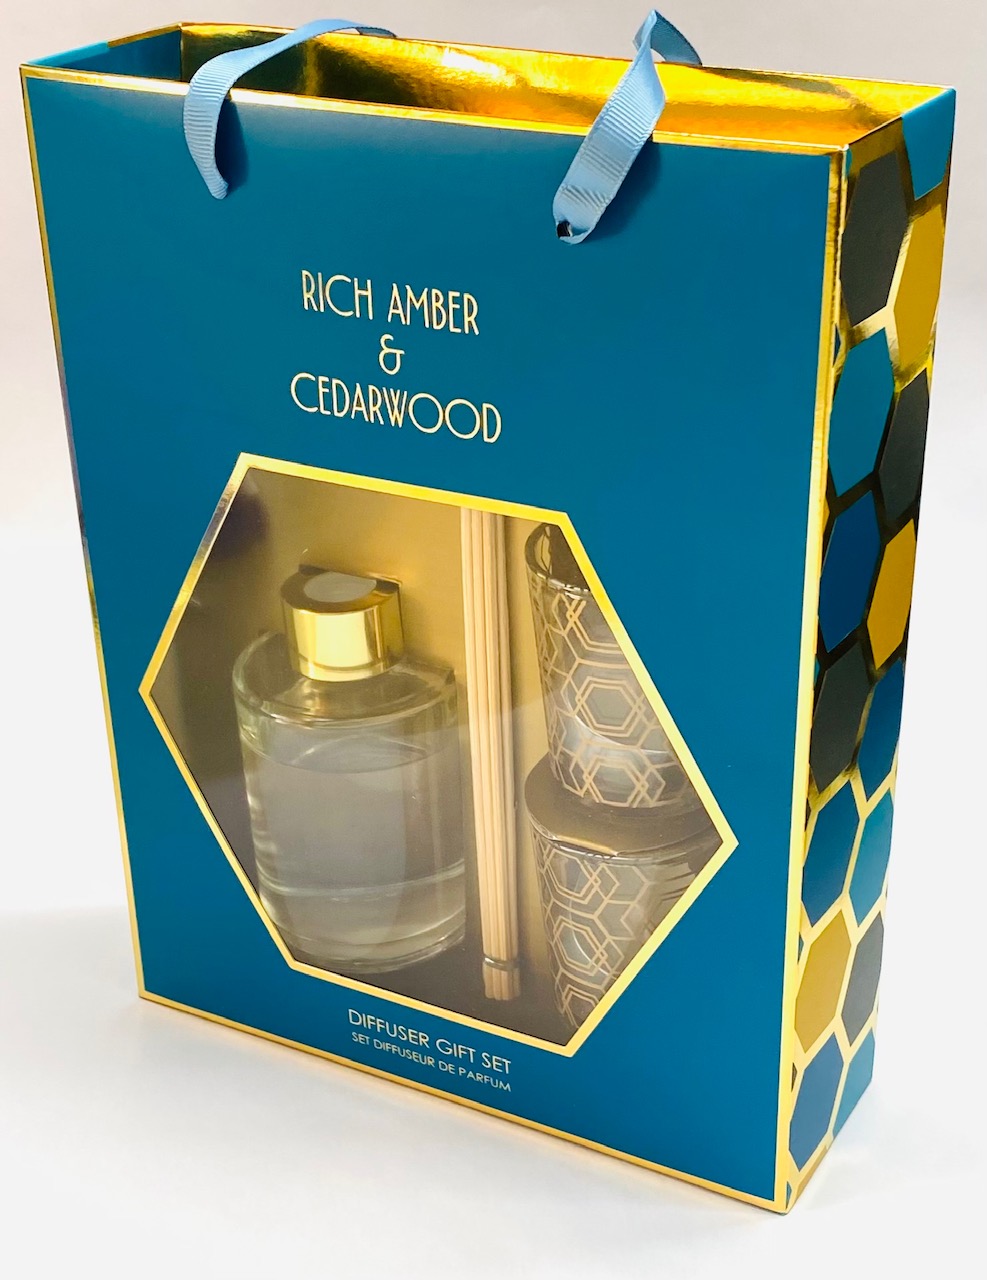 Rich Amber & Cedarwood Reed Diffuser Set in a Gift Box